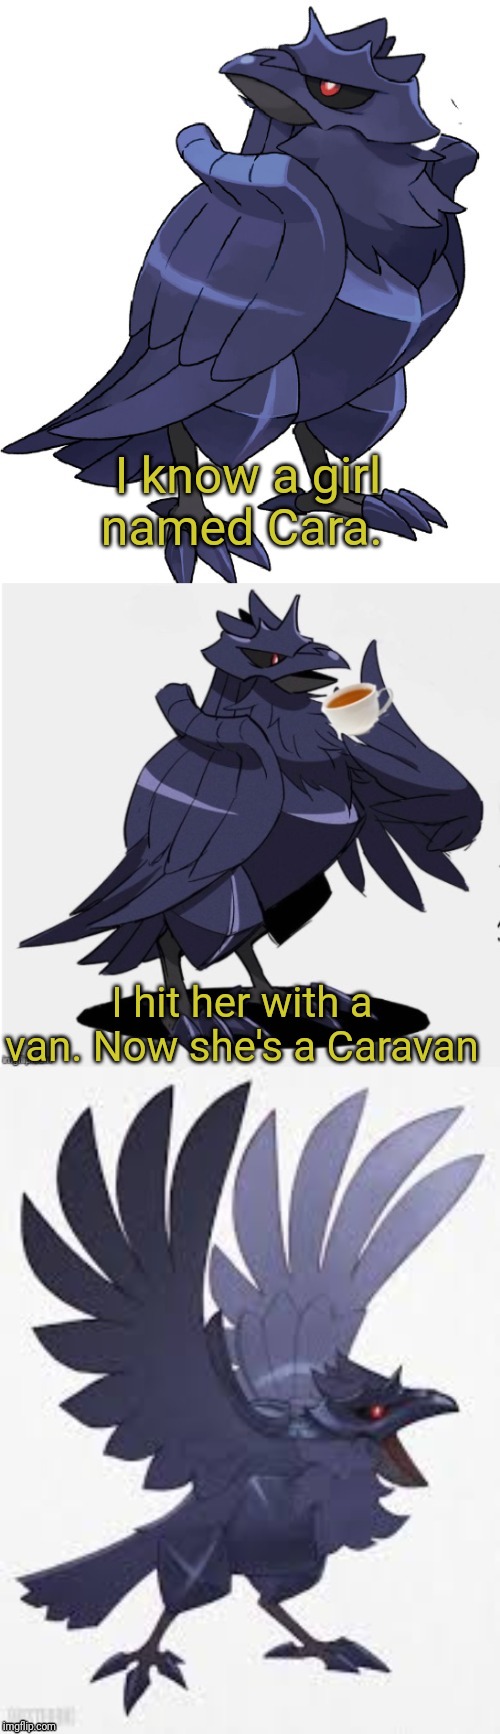 Well it's true. I do know someone named Cara. But... I didn't kill her. Don't worry. | I know a girl named Cara. I hit her with a van. Now she's a Caravan | image tagged in bad pun ttdc,caravan,bad pun,dark humor | made w/ Imgflip meme maker